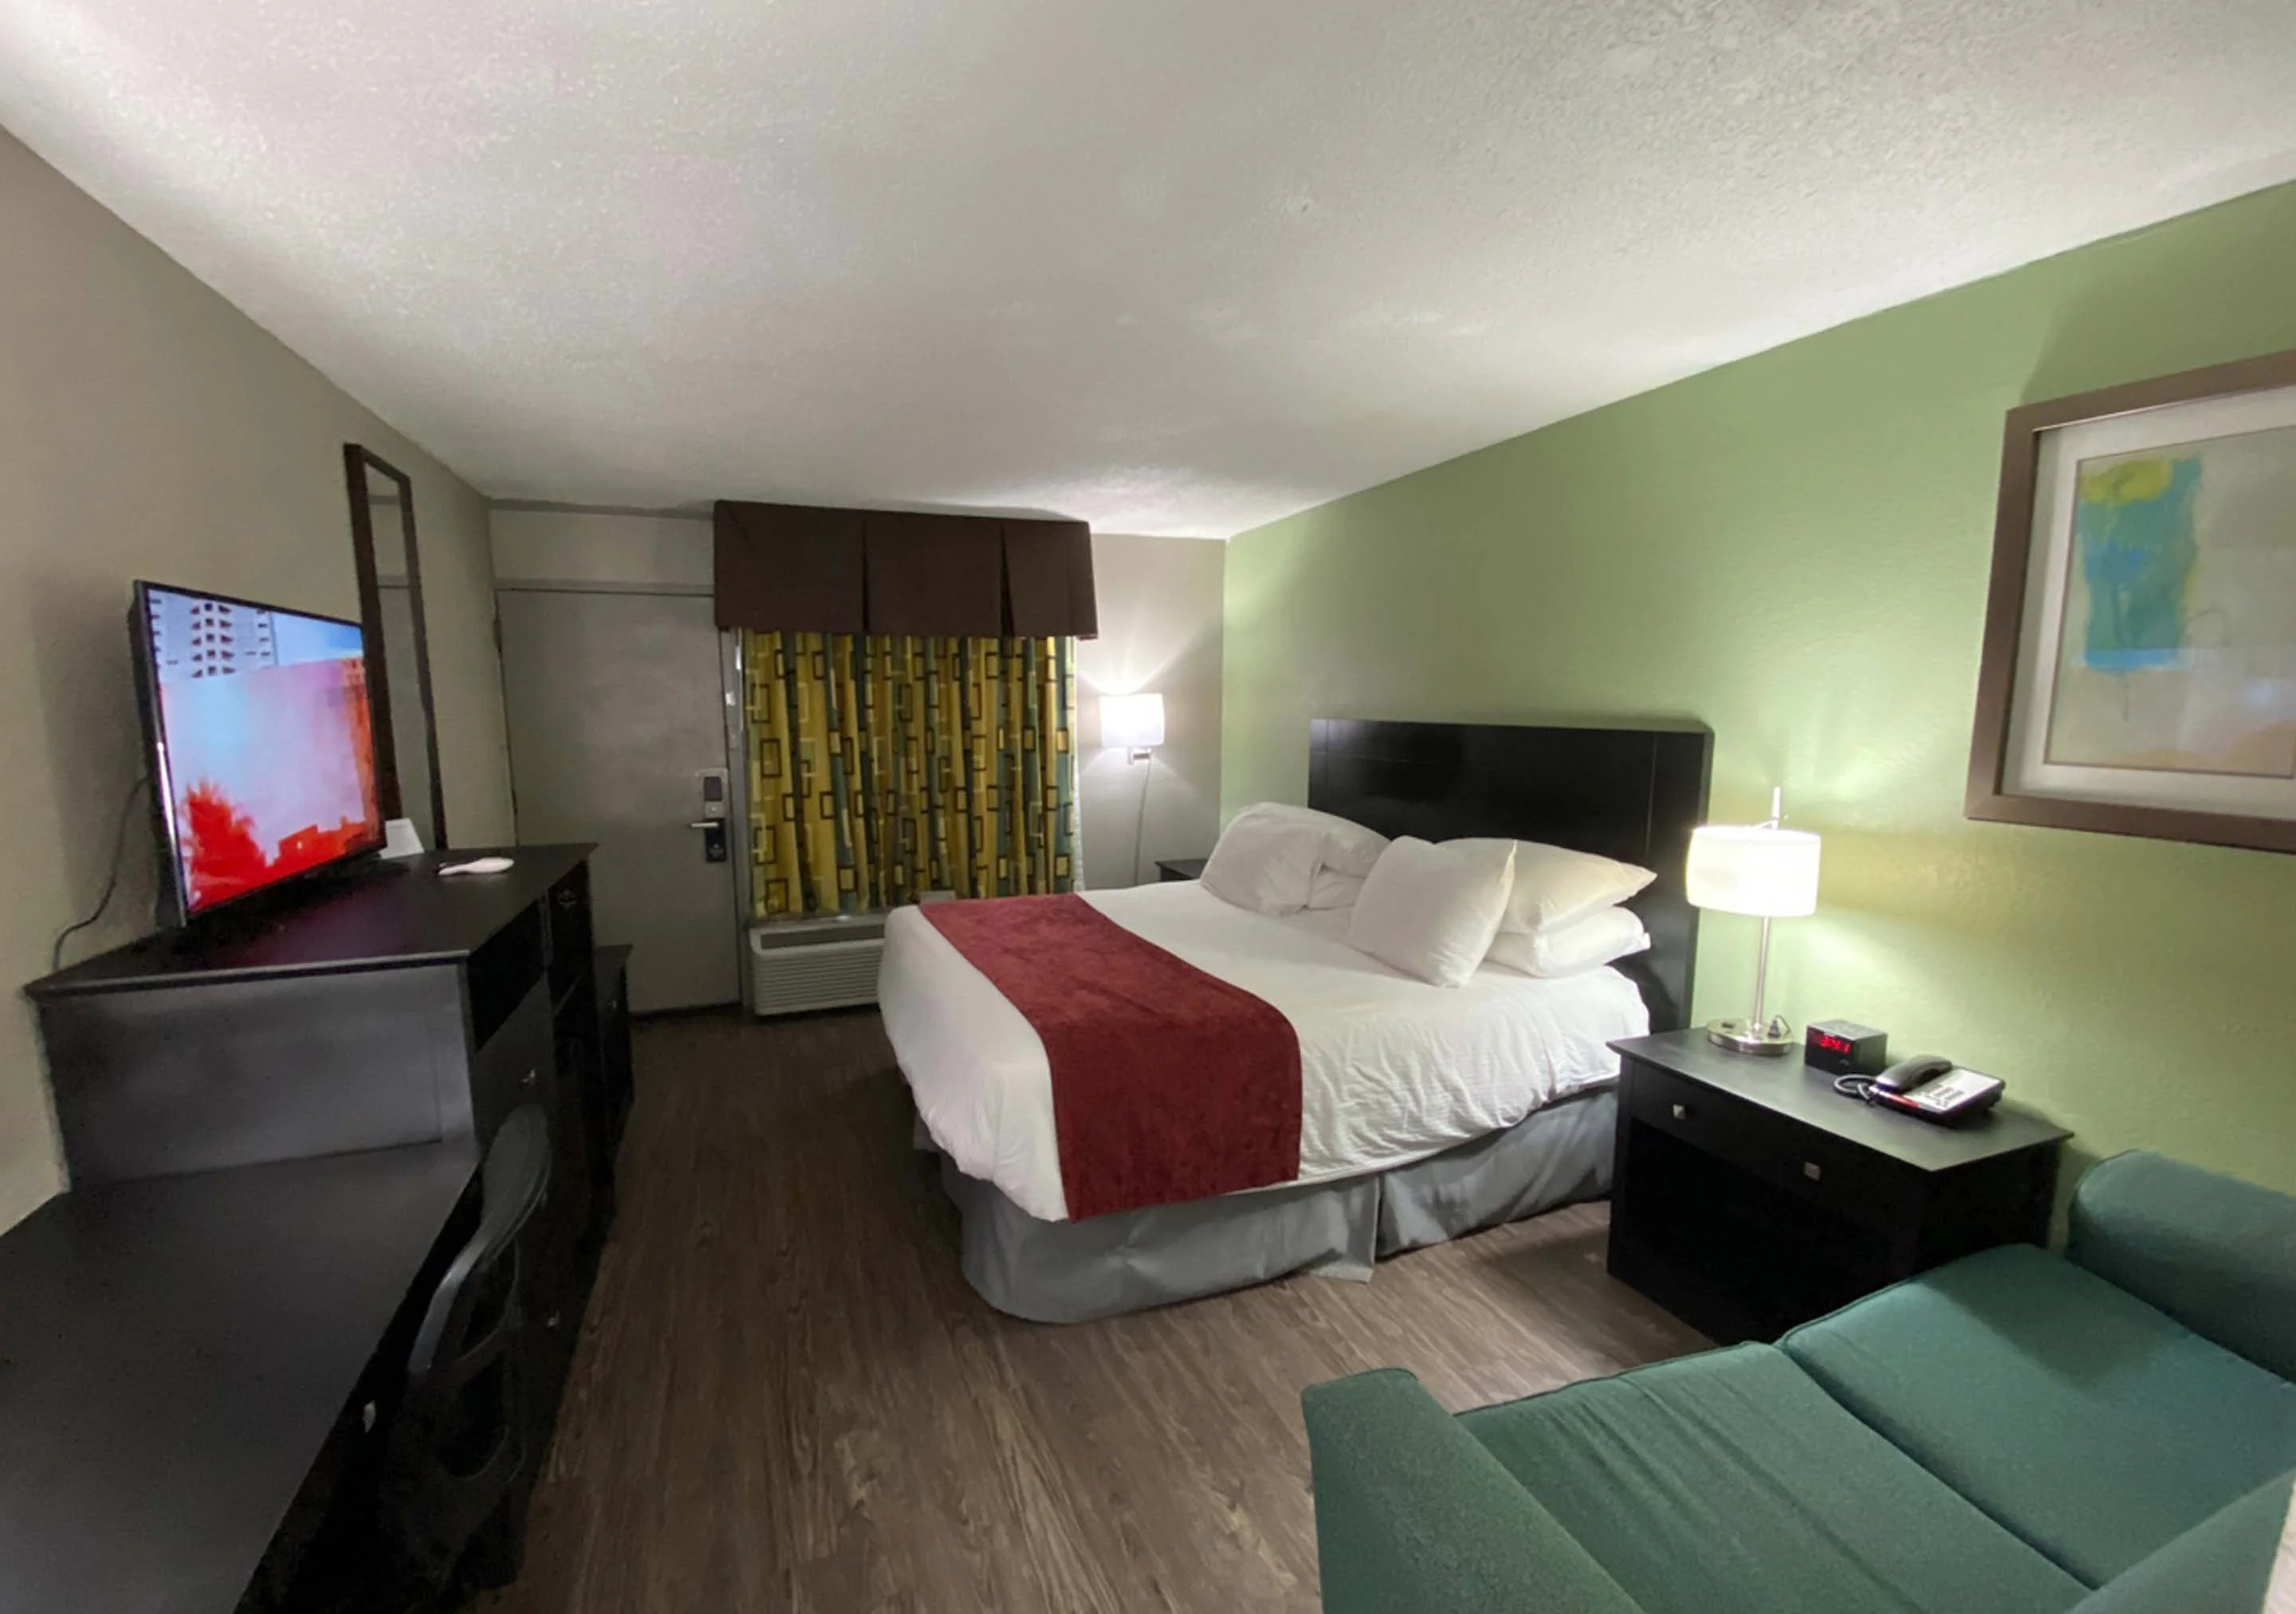 Manchester Tennessee hotels